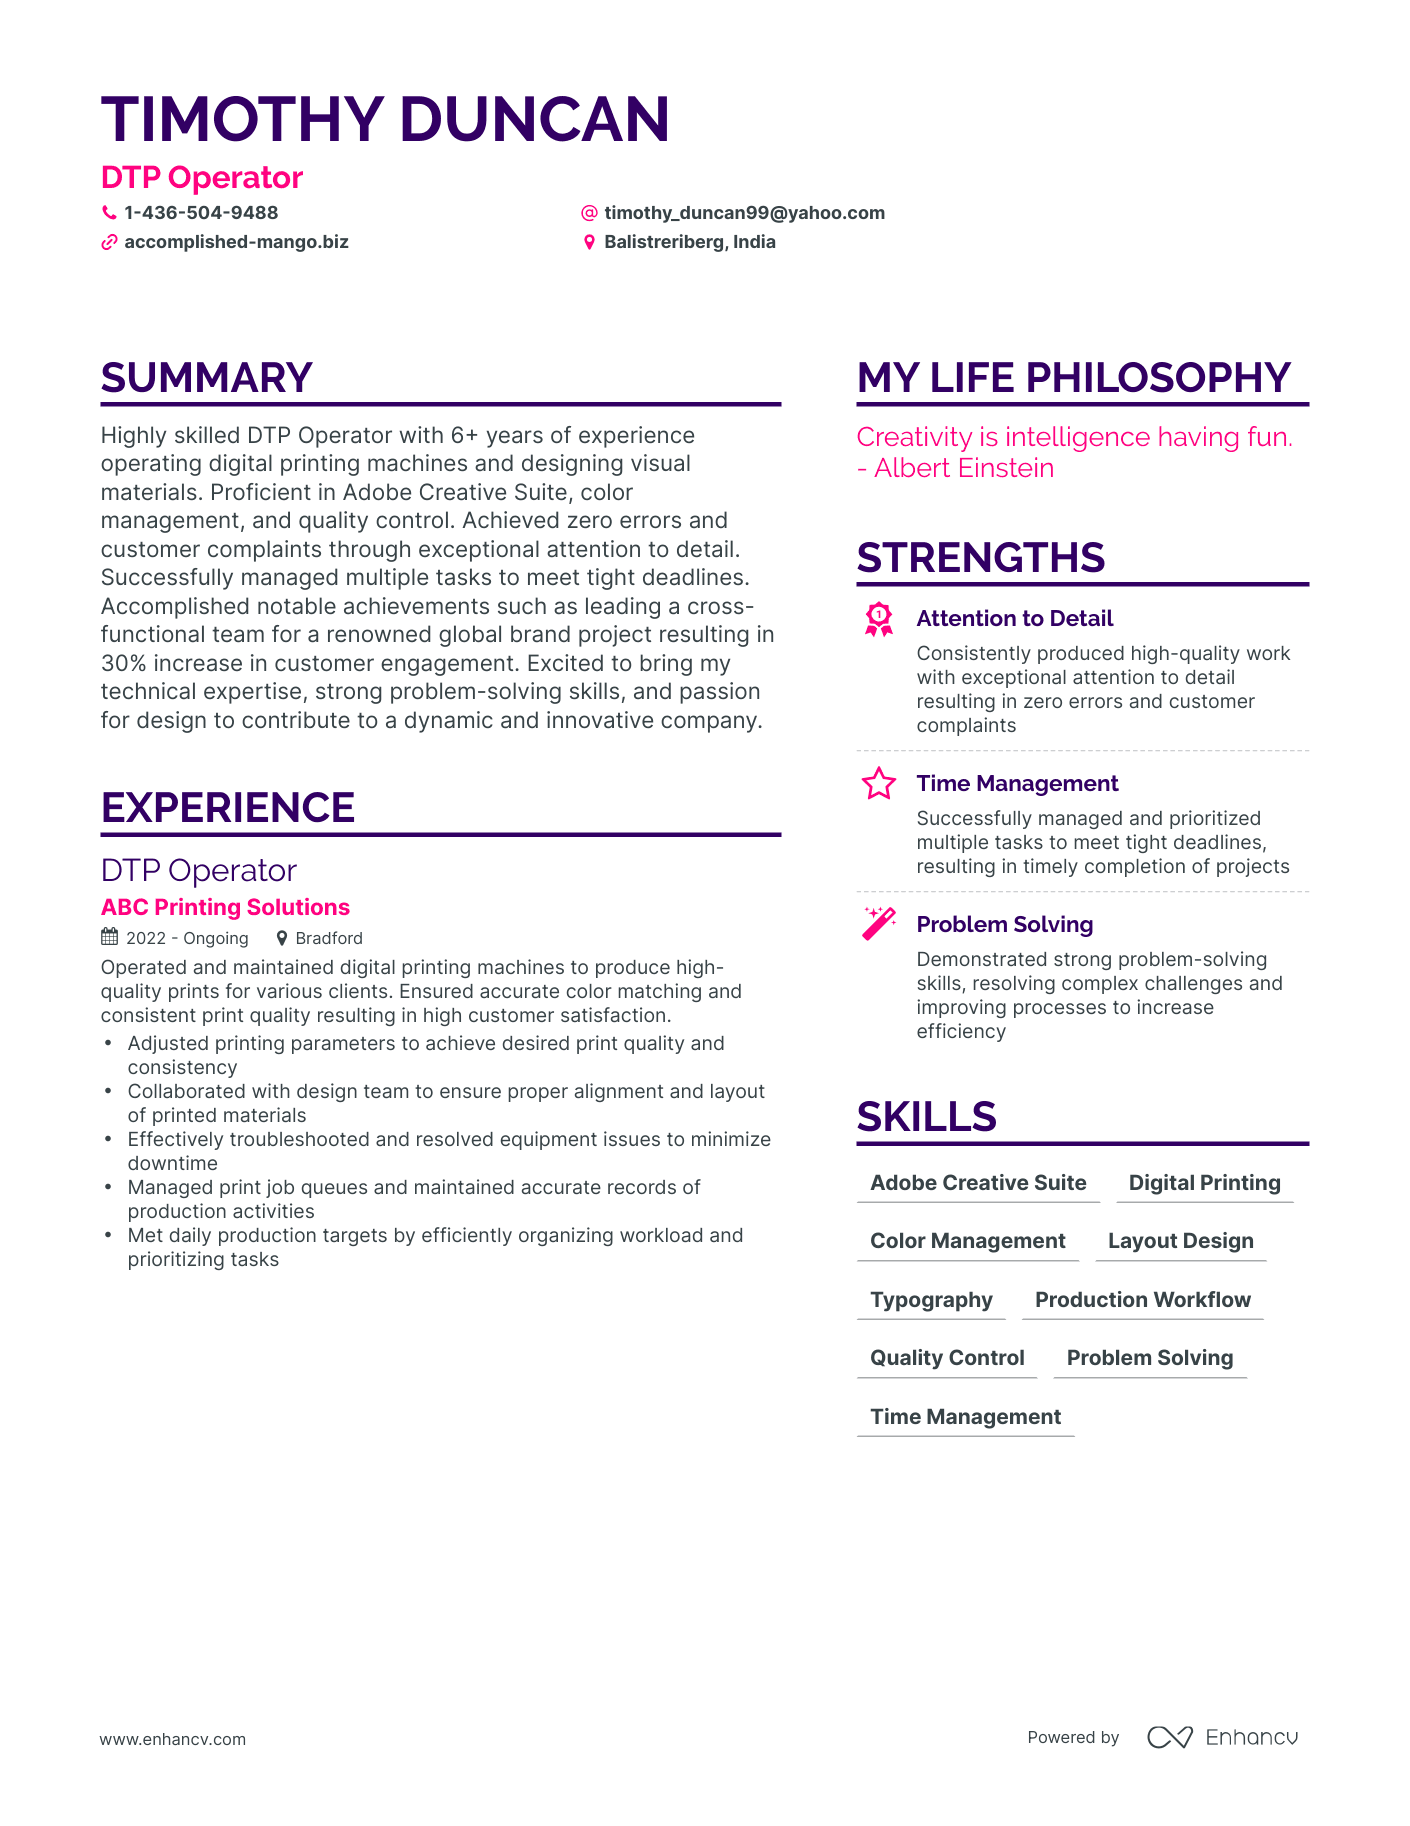 DTP Operator resume example